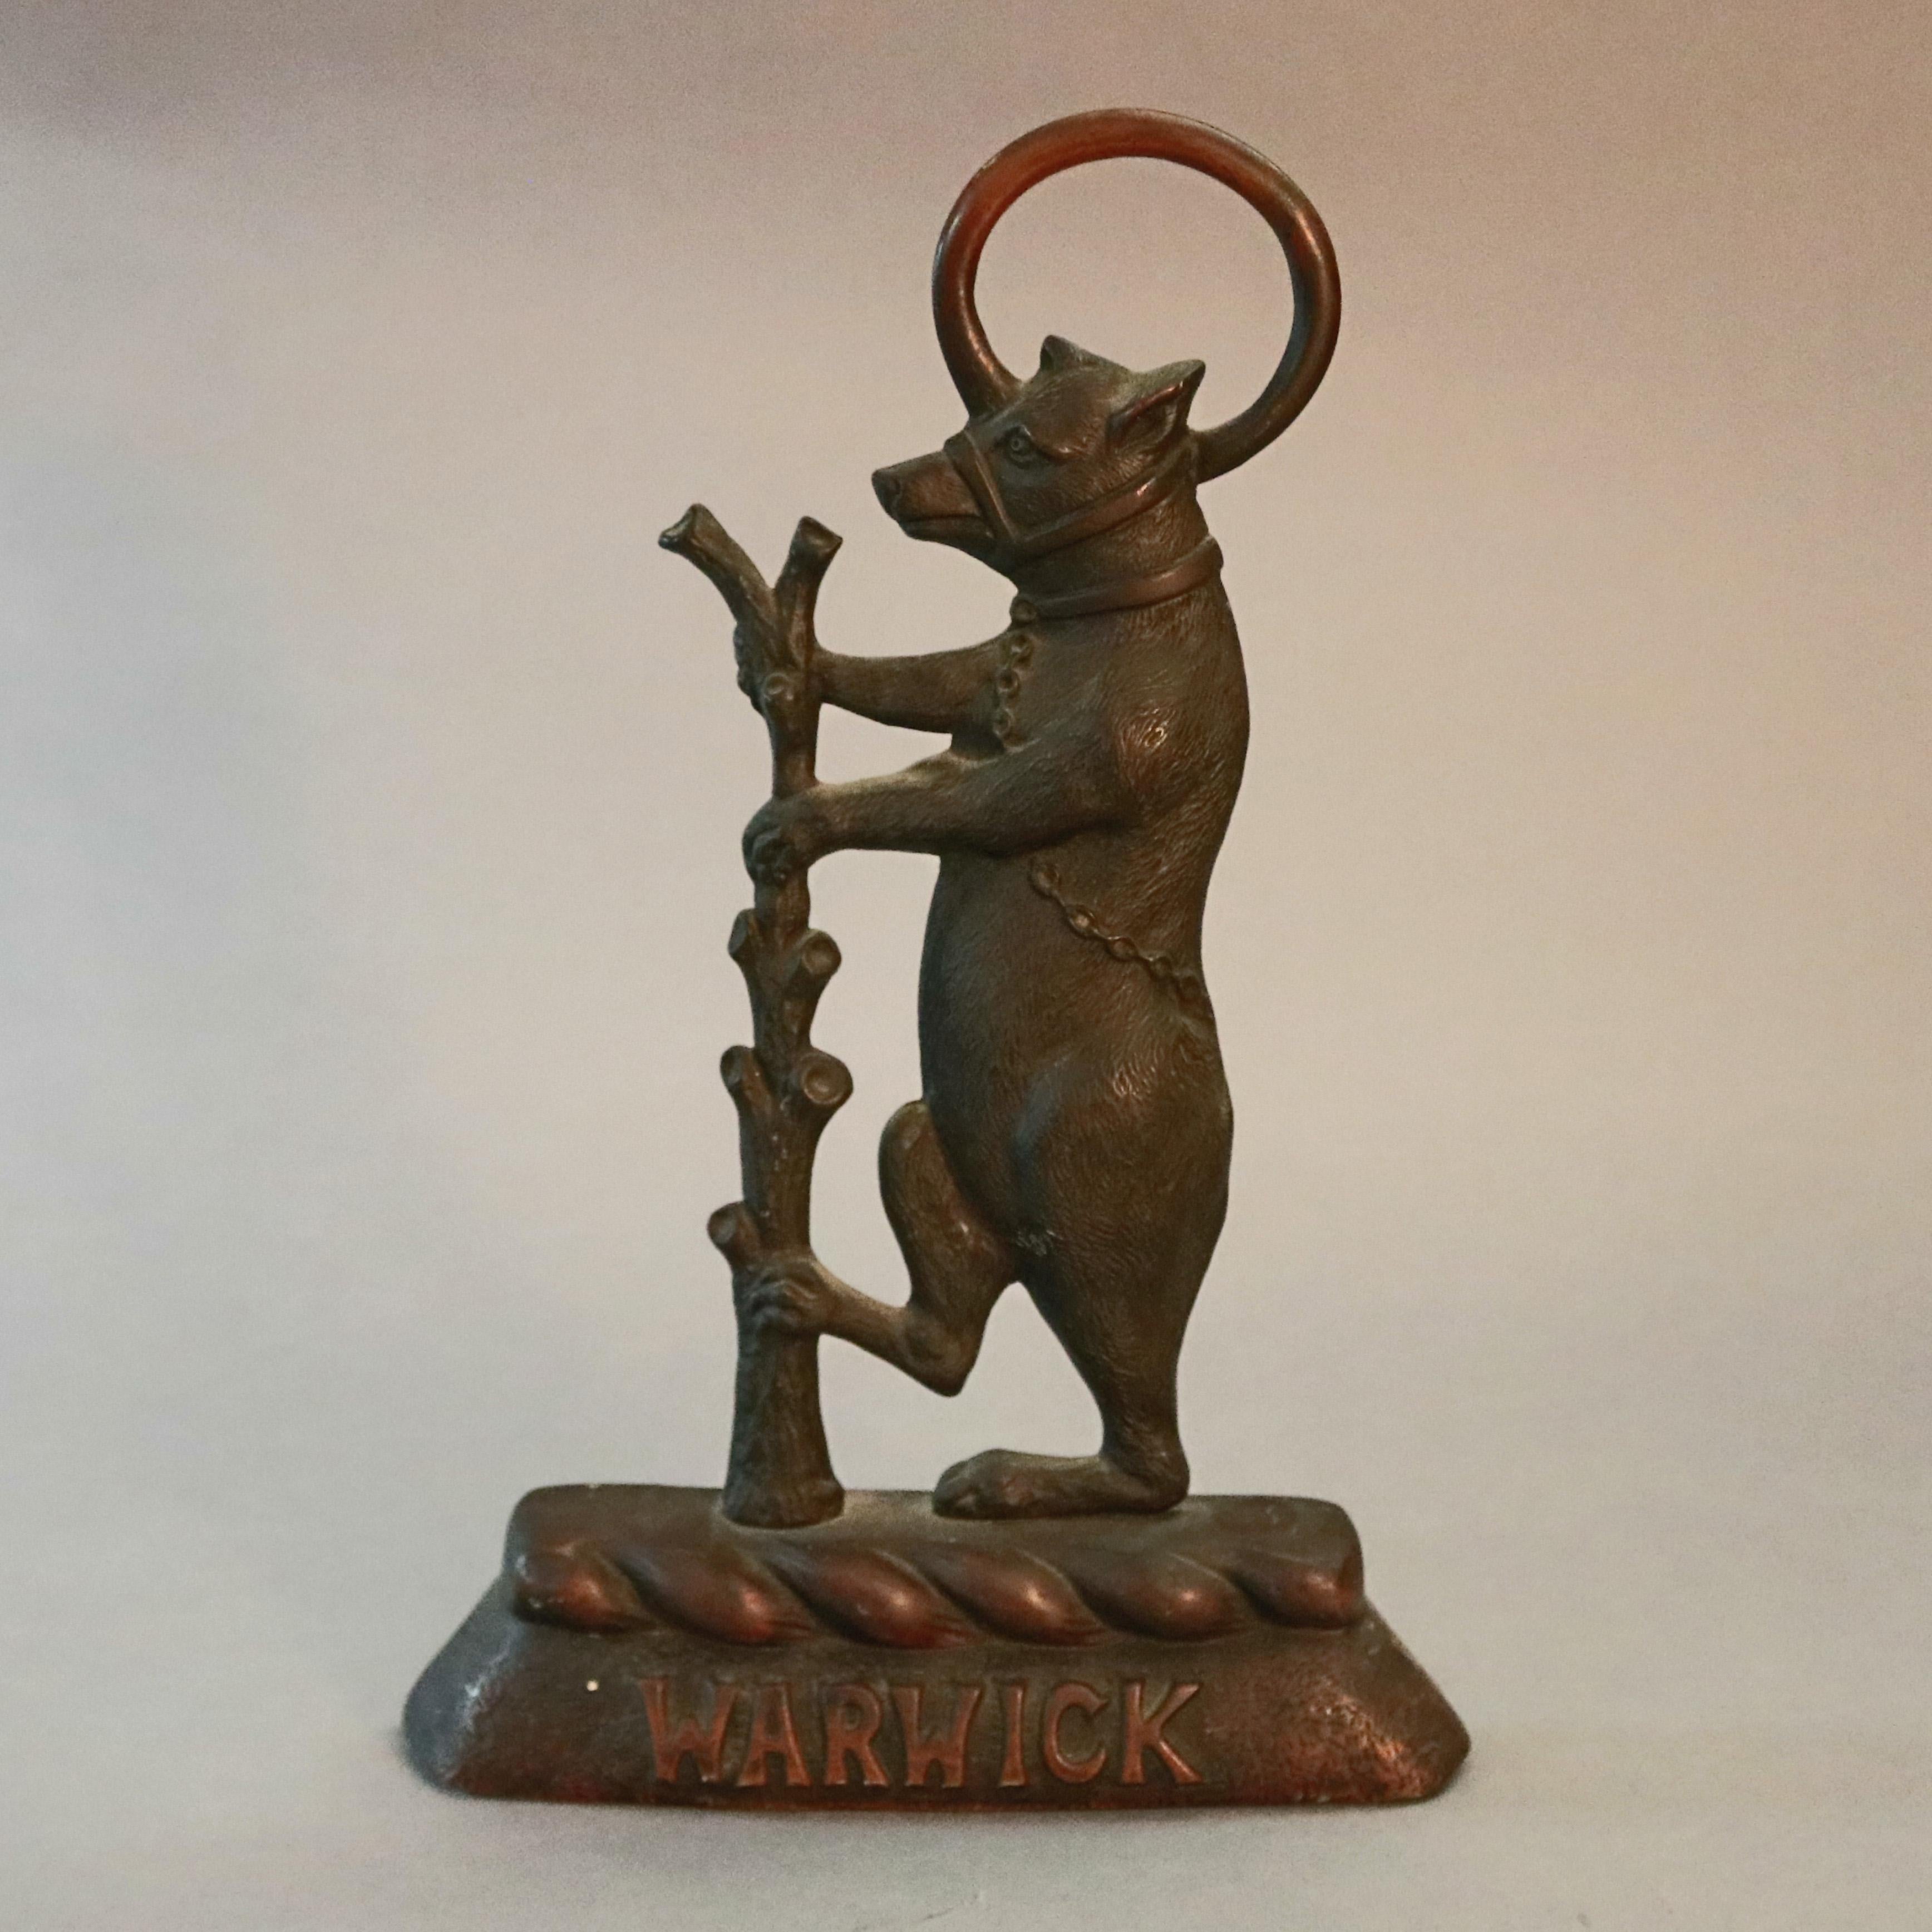 An antique English figural door stop offers cast bronze sculpture of Warwick Bear (bear and ragged staff) on base embossed with 